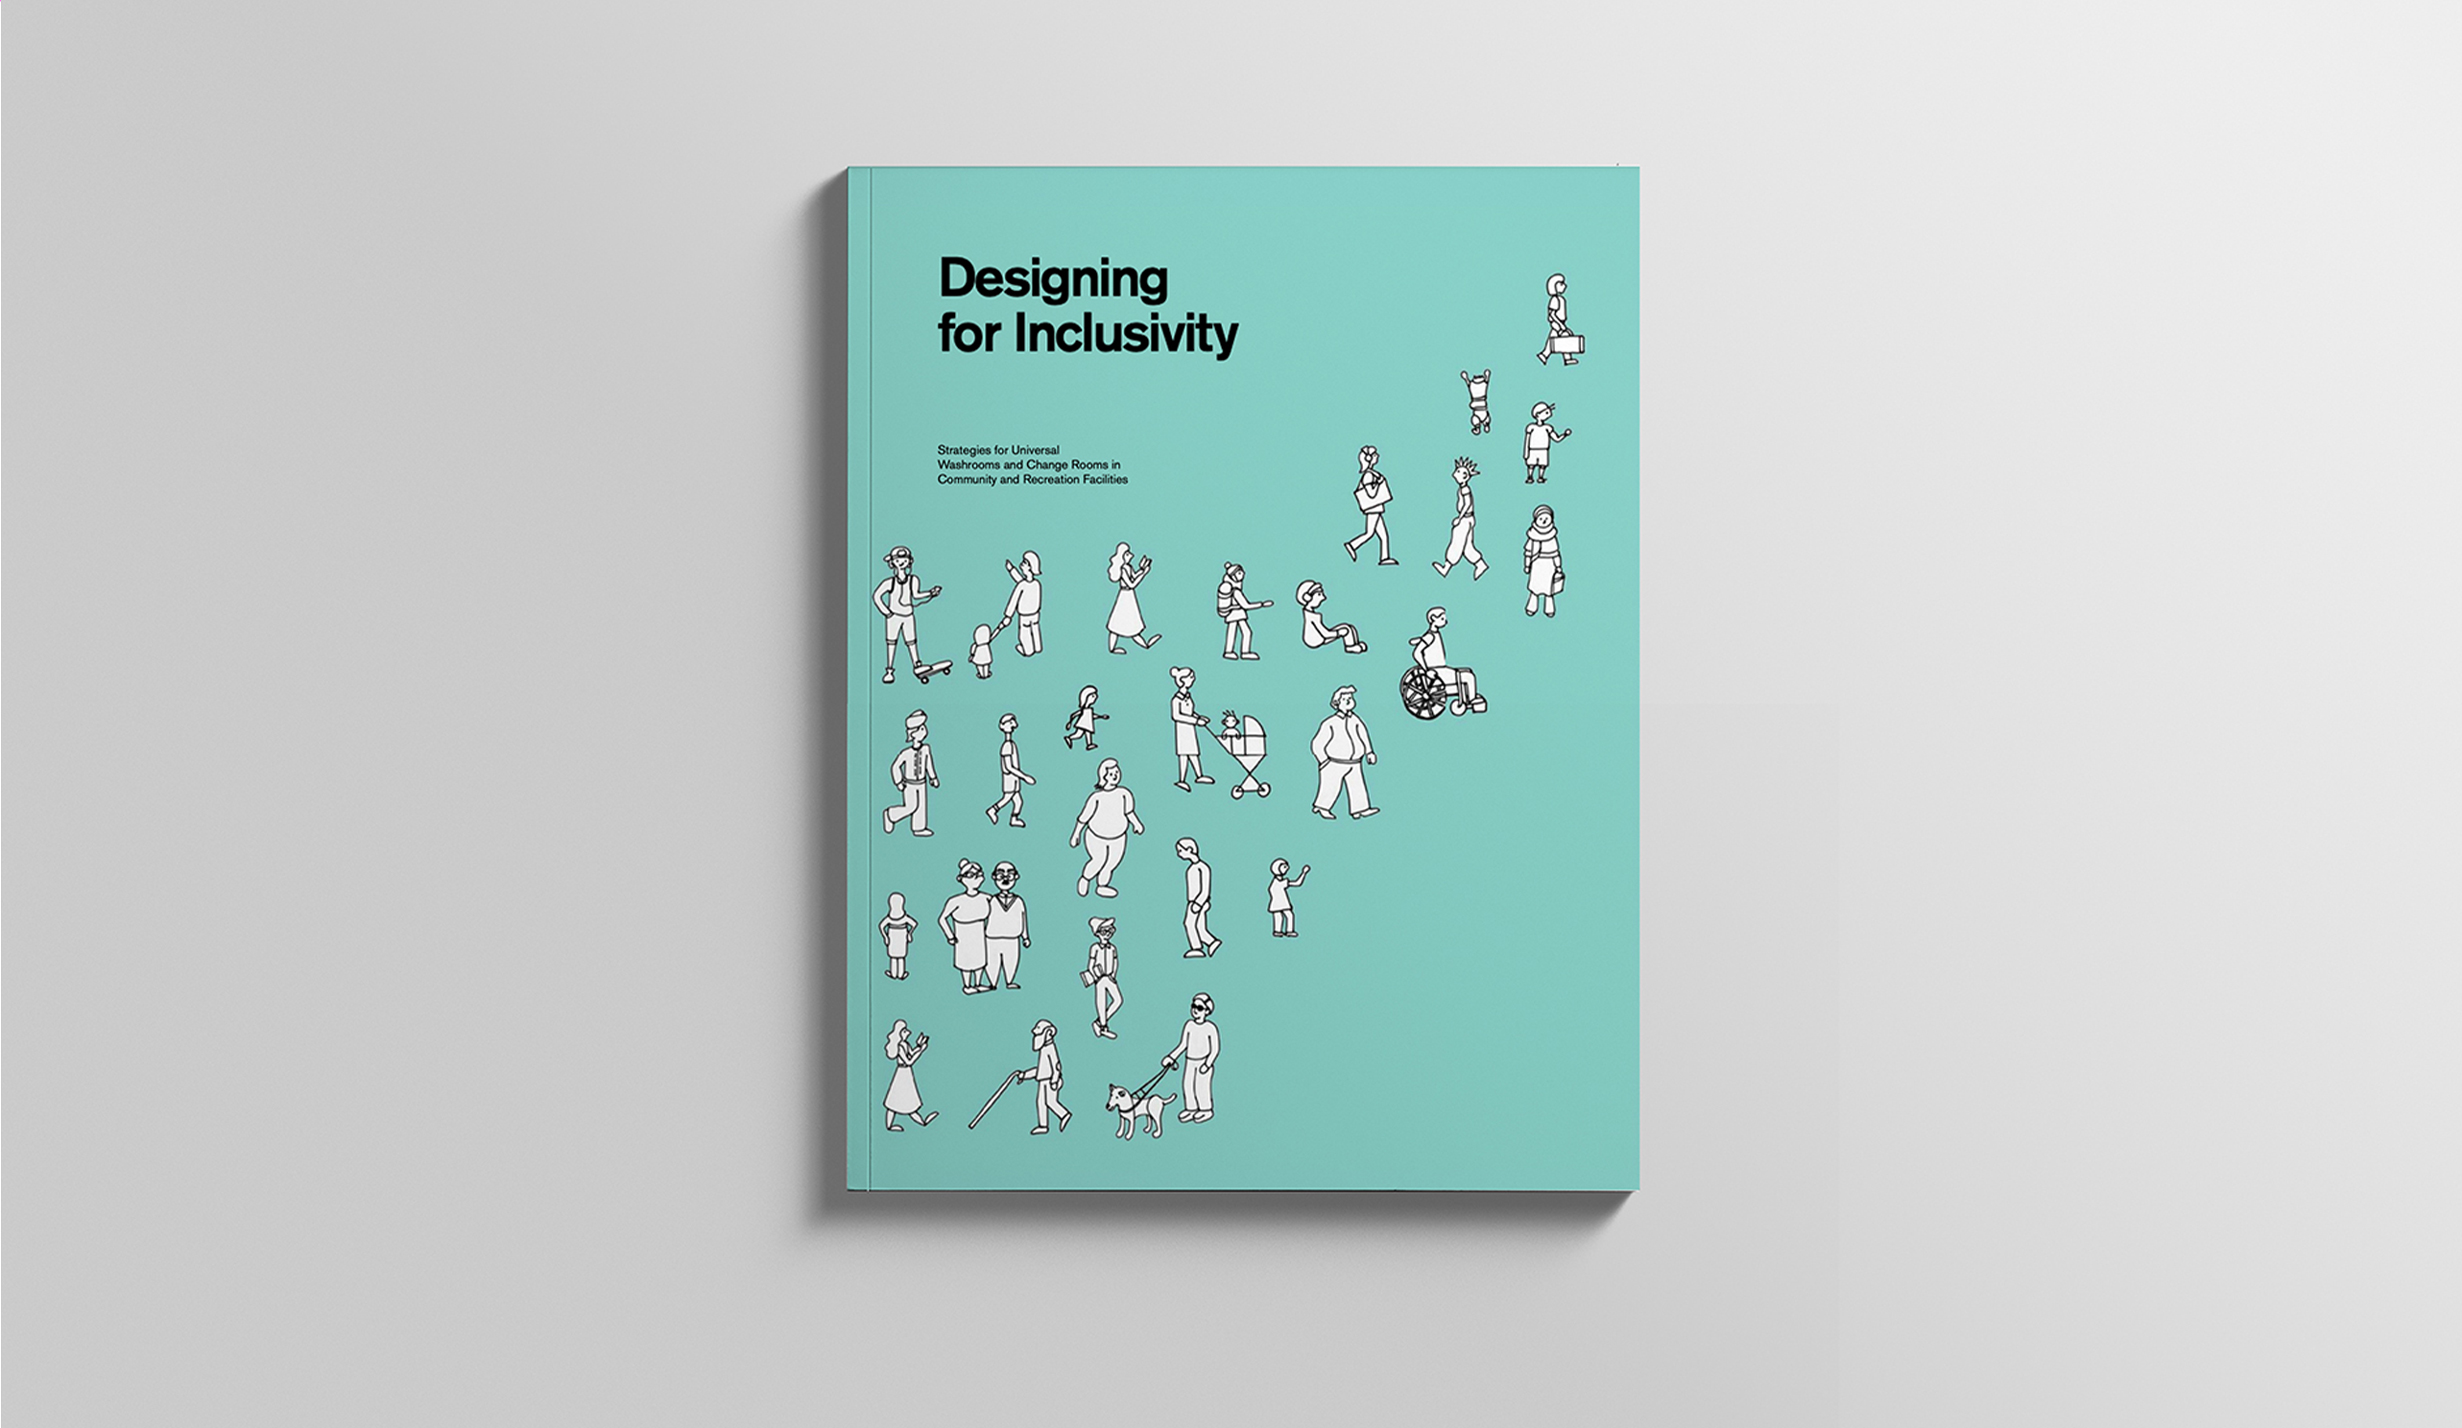 Front cover of the Designing for Inclusivity book has illustrations of people all shapes, sizes, ages, and abilities.